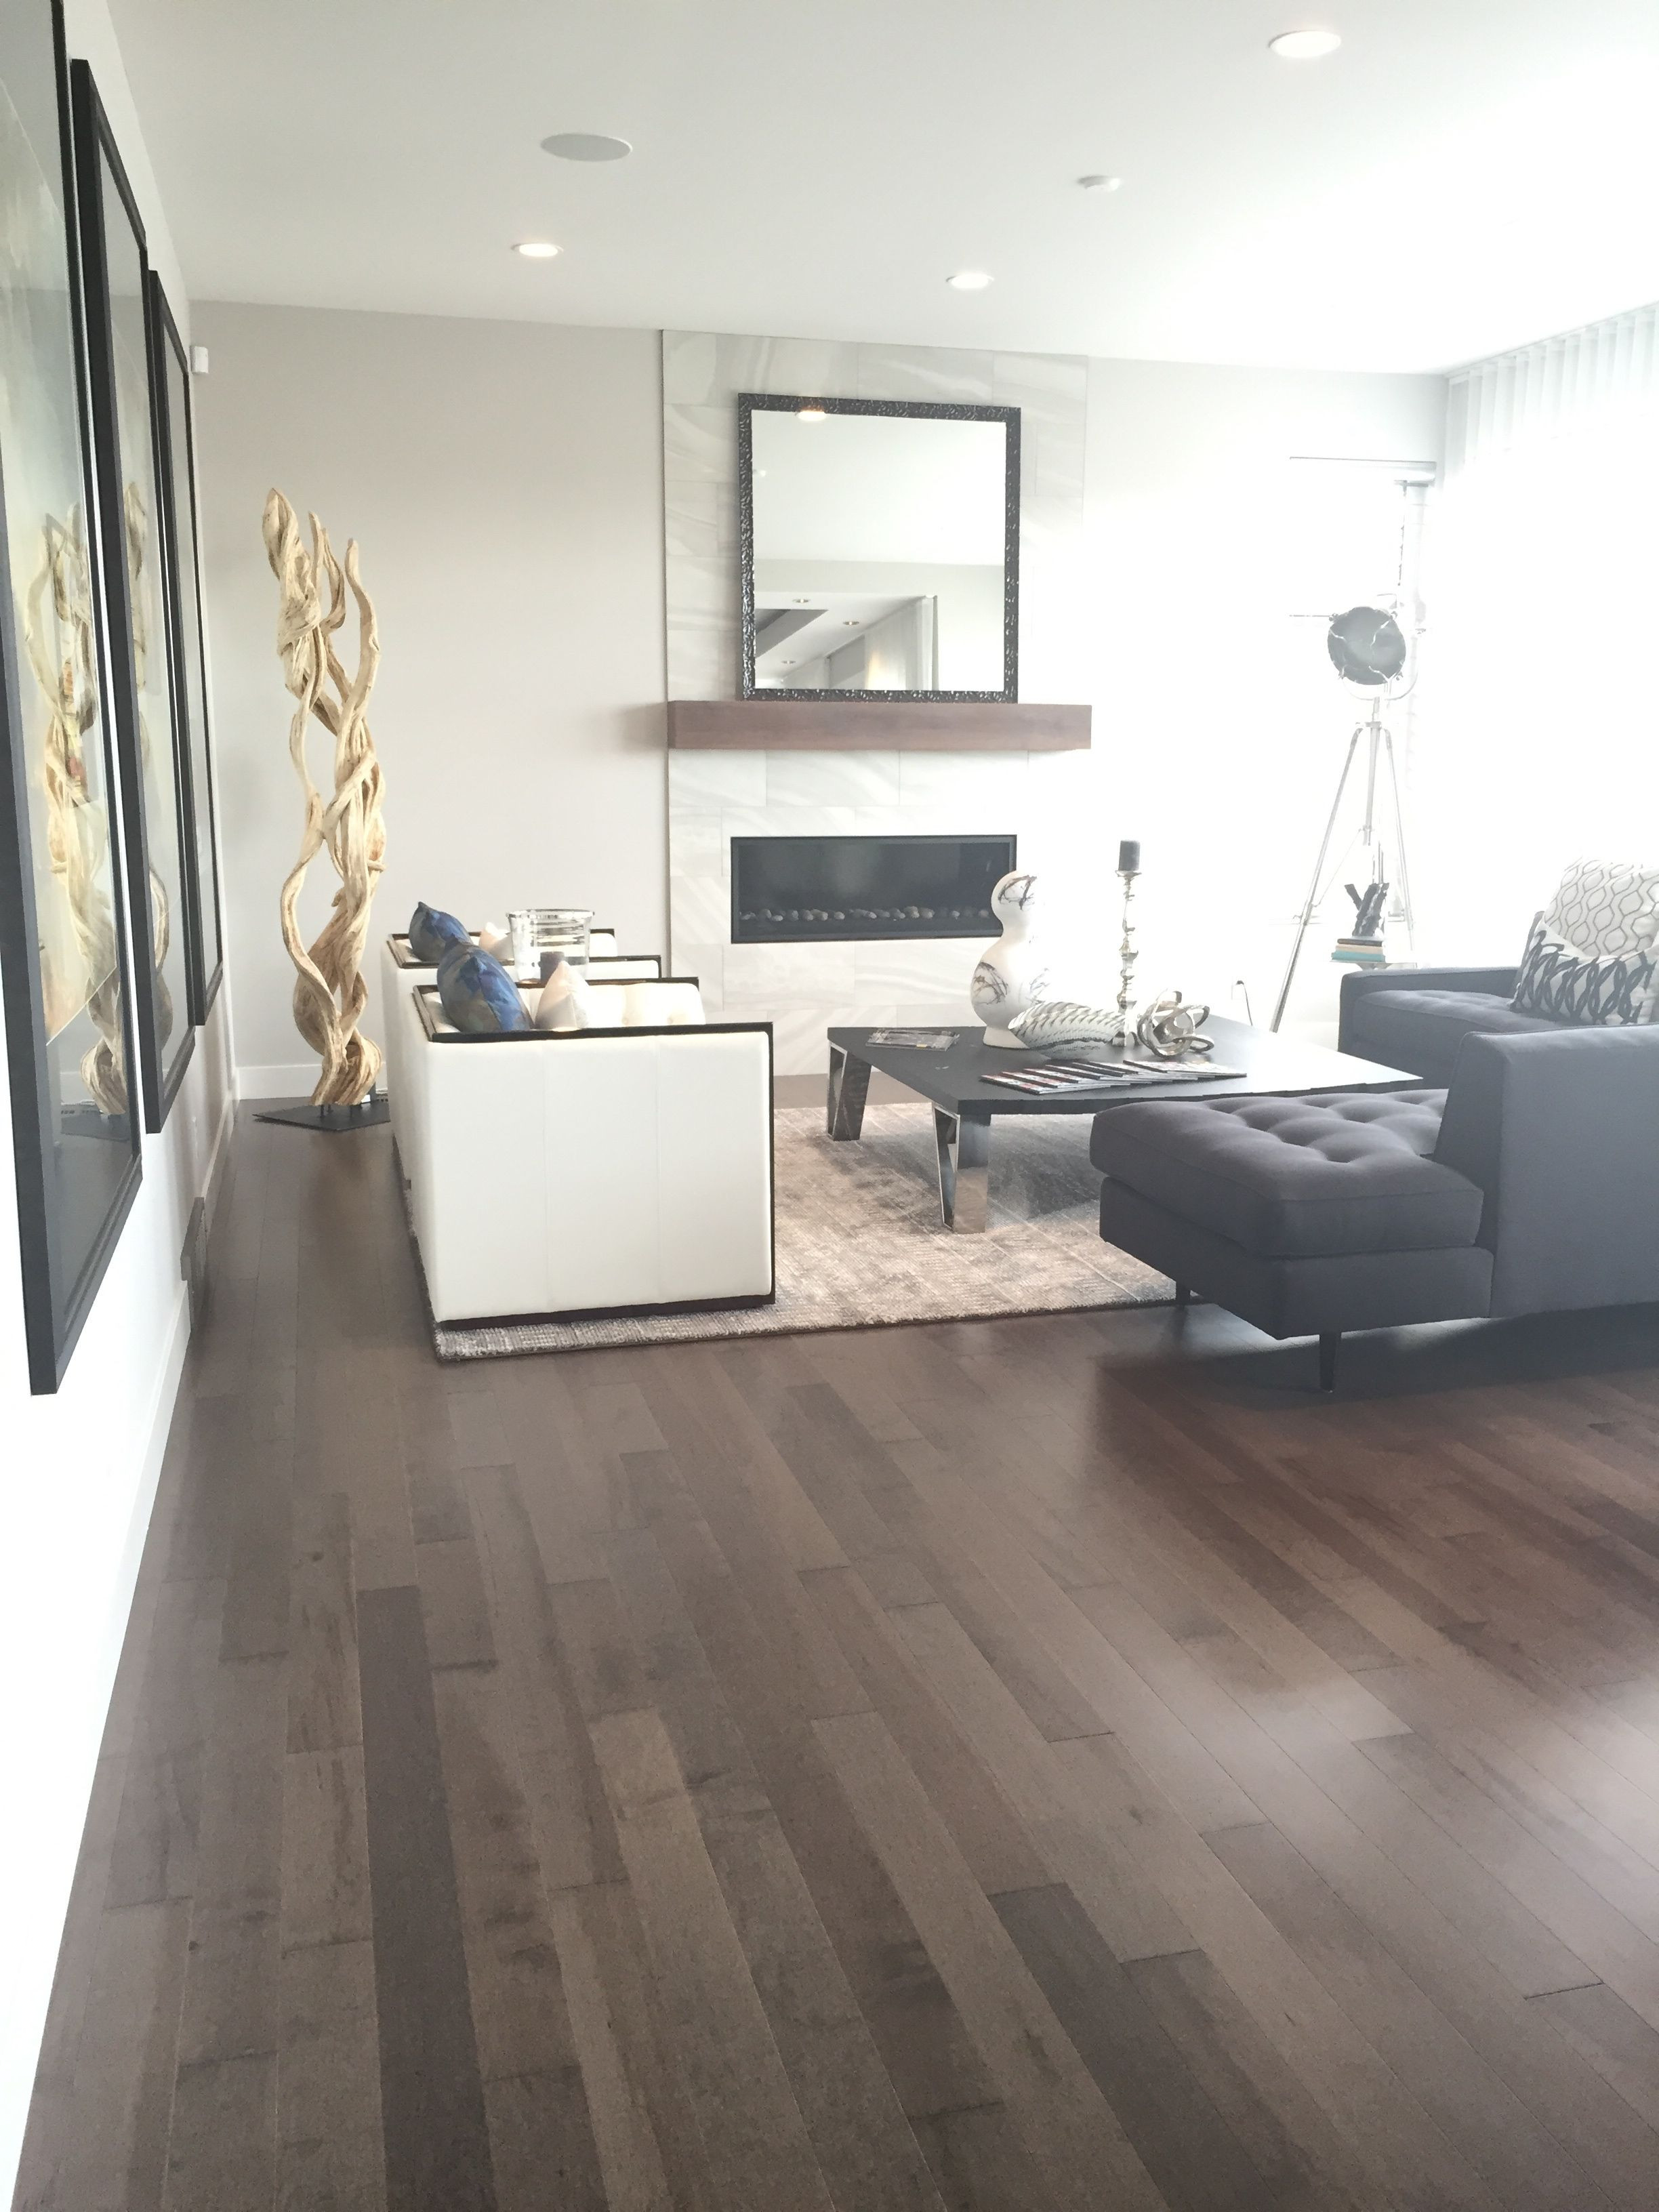 hardwood flooring calgary price of smoky grey essential hard maple tradition lauzon hardwood with beautiful living room from the cantata showhome featuring lauzons smokey grey hard maple hardwood flooring from the essential collection